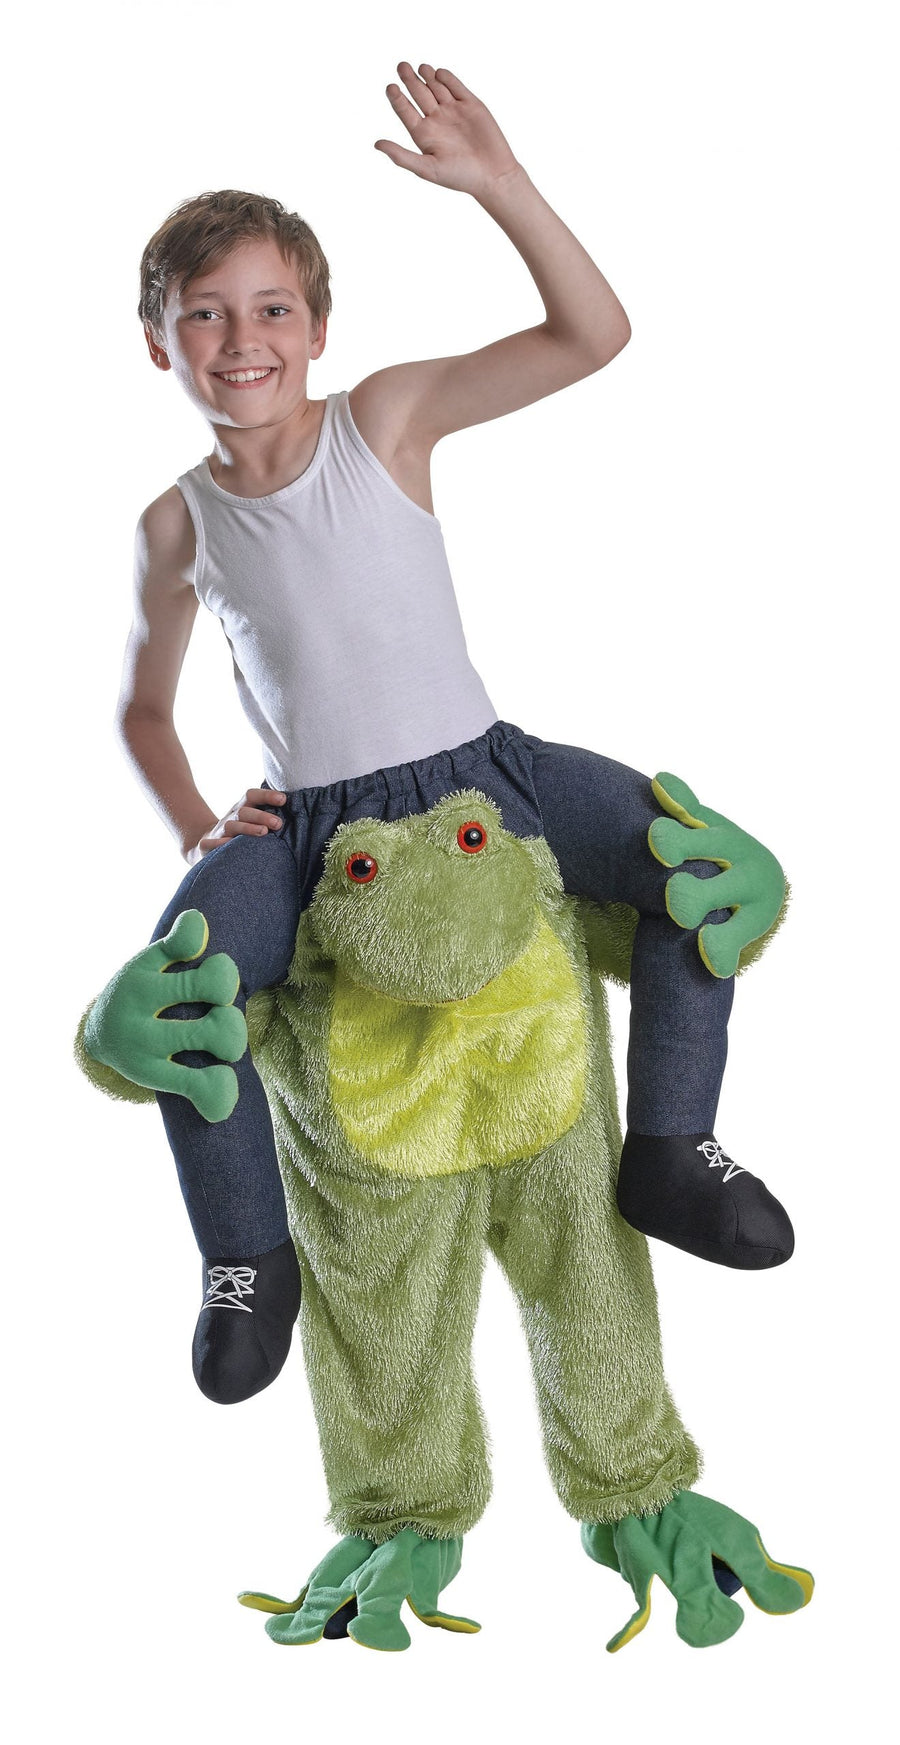 Piggy Back Frog Costume for Kids Fun Ride On Outfit_1